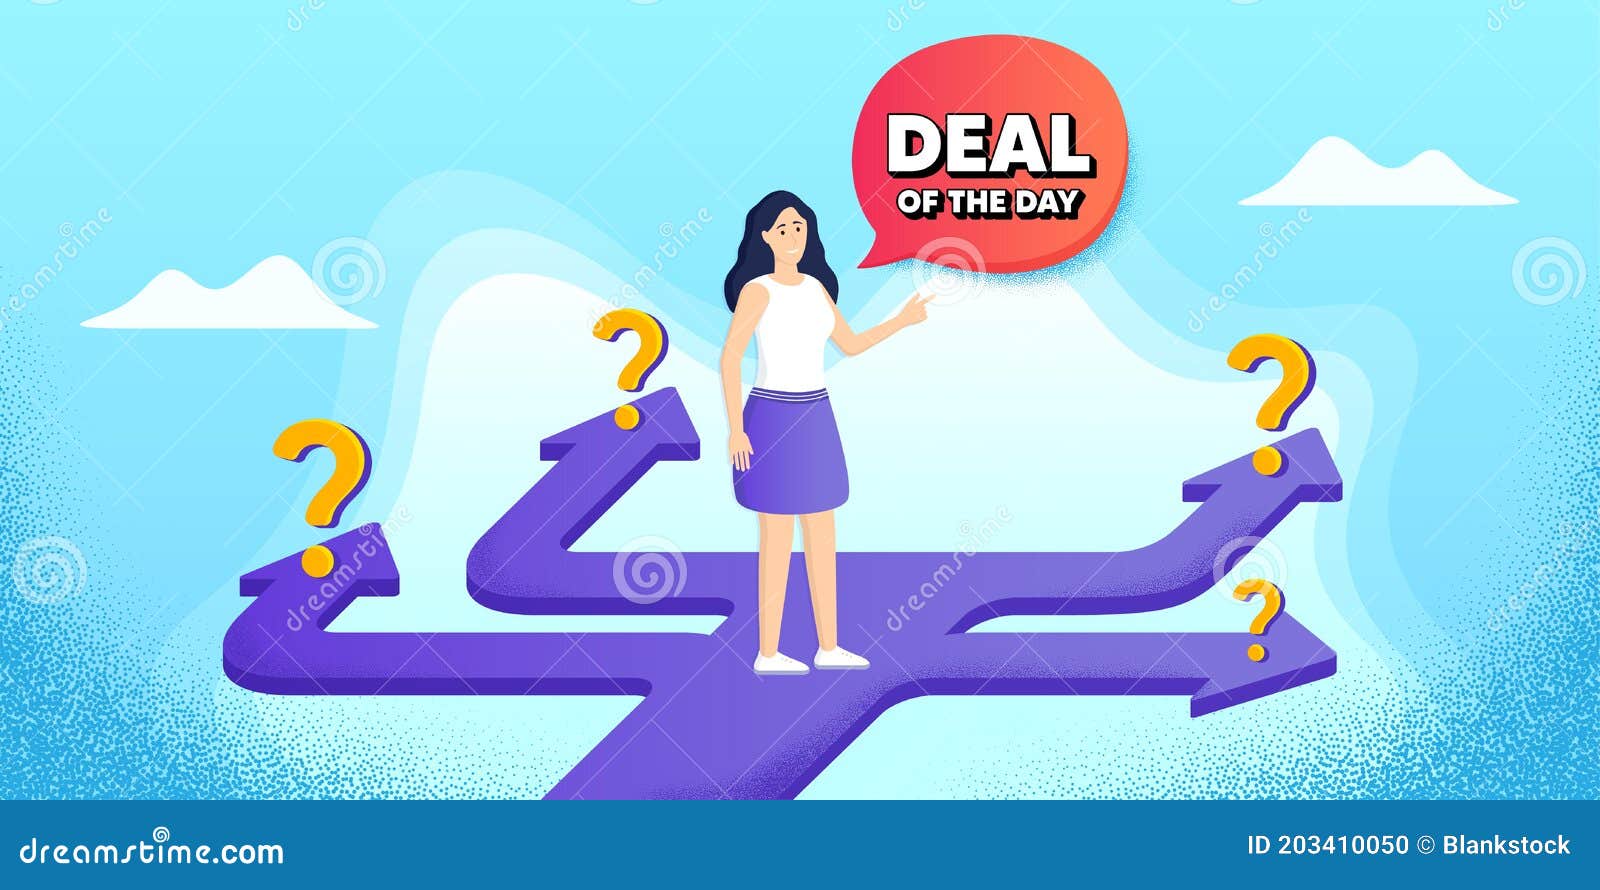 https://thumbs.dreamstime.com/z/deal-day-symbol-special-offer-price-sign-vector-future-path-choice-search-career-strategy-advertising-discounts-directions-203410050.jpg